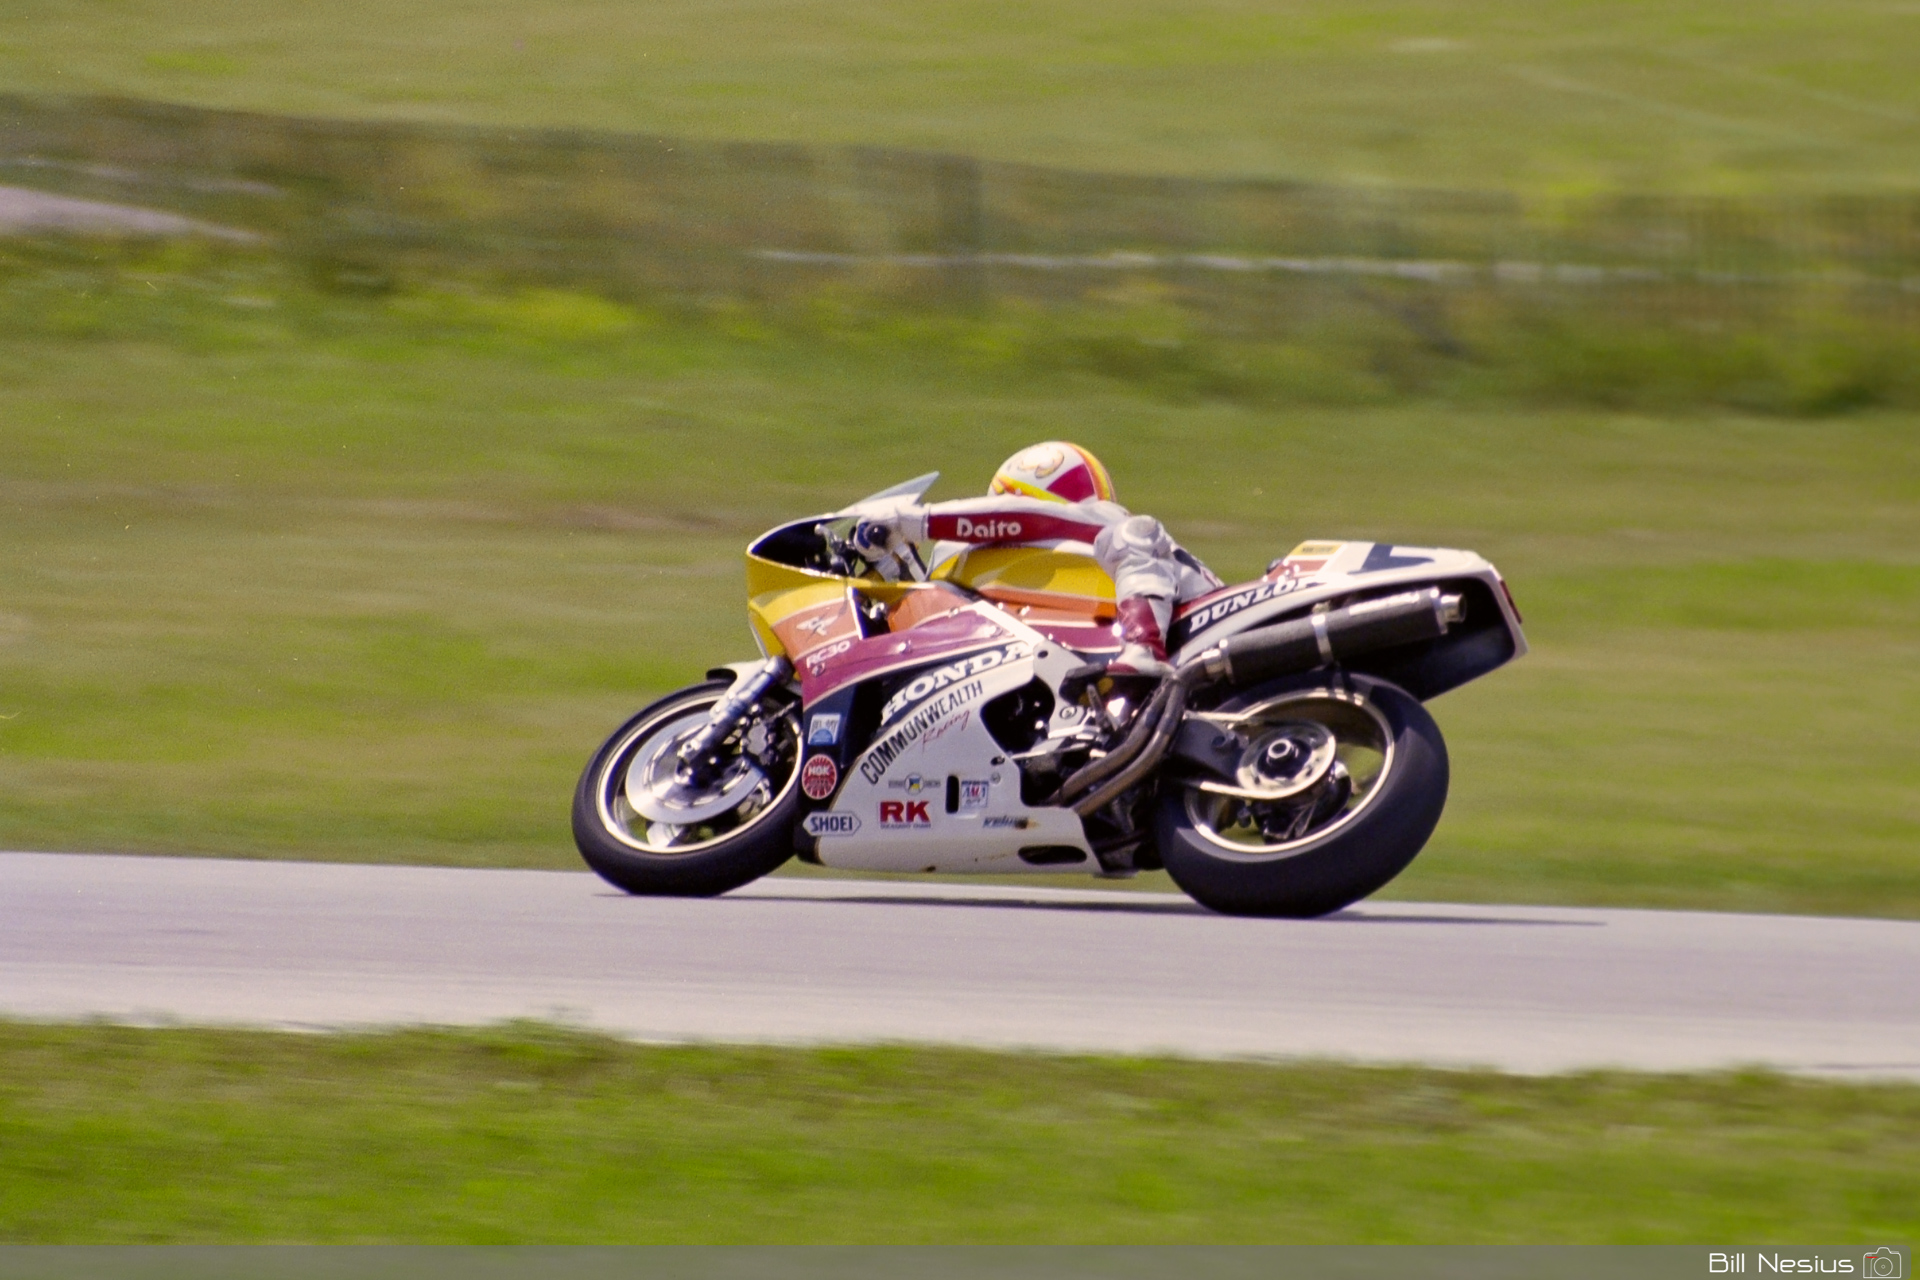 Randy Renfrow on the Number 5 Commonwealth Racing Honda RC30
 / FLM_6430 / 3